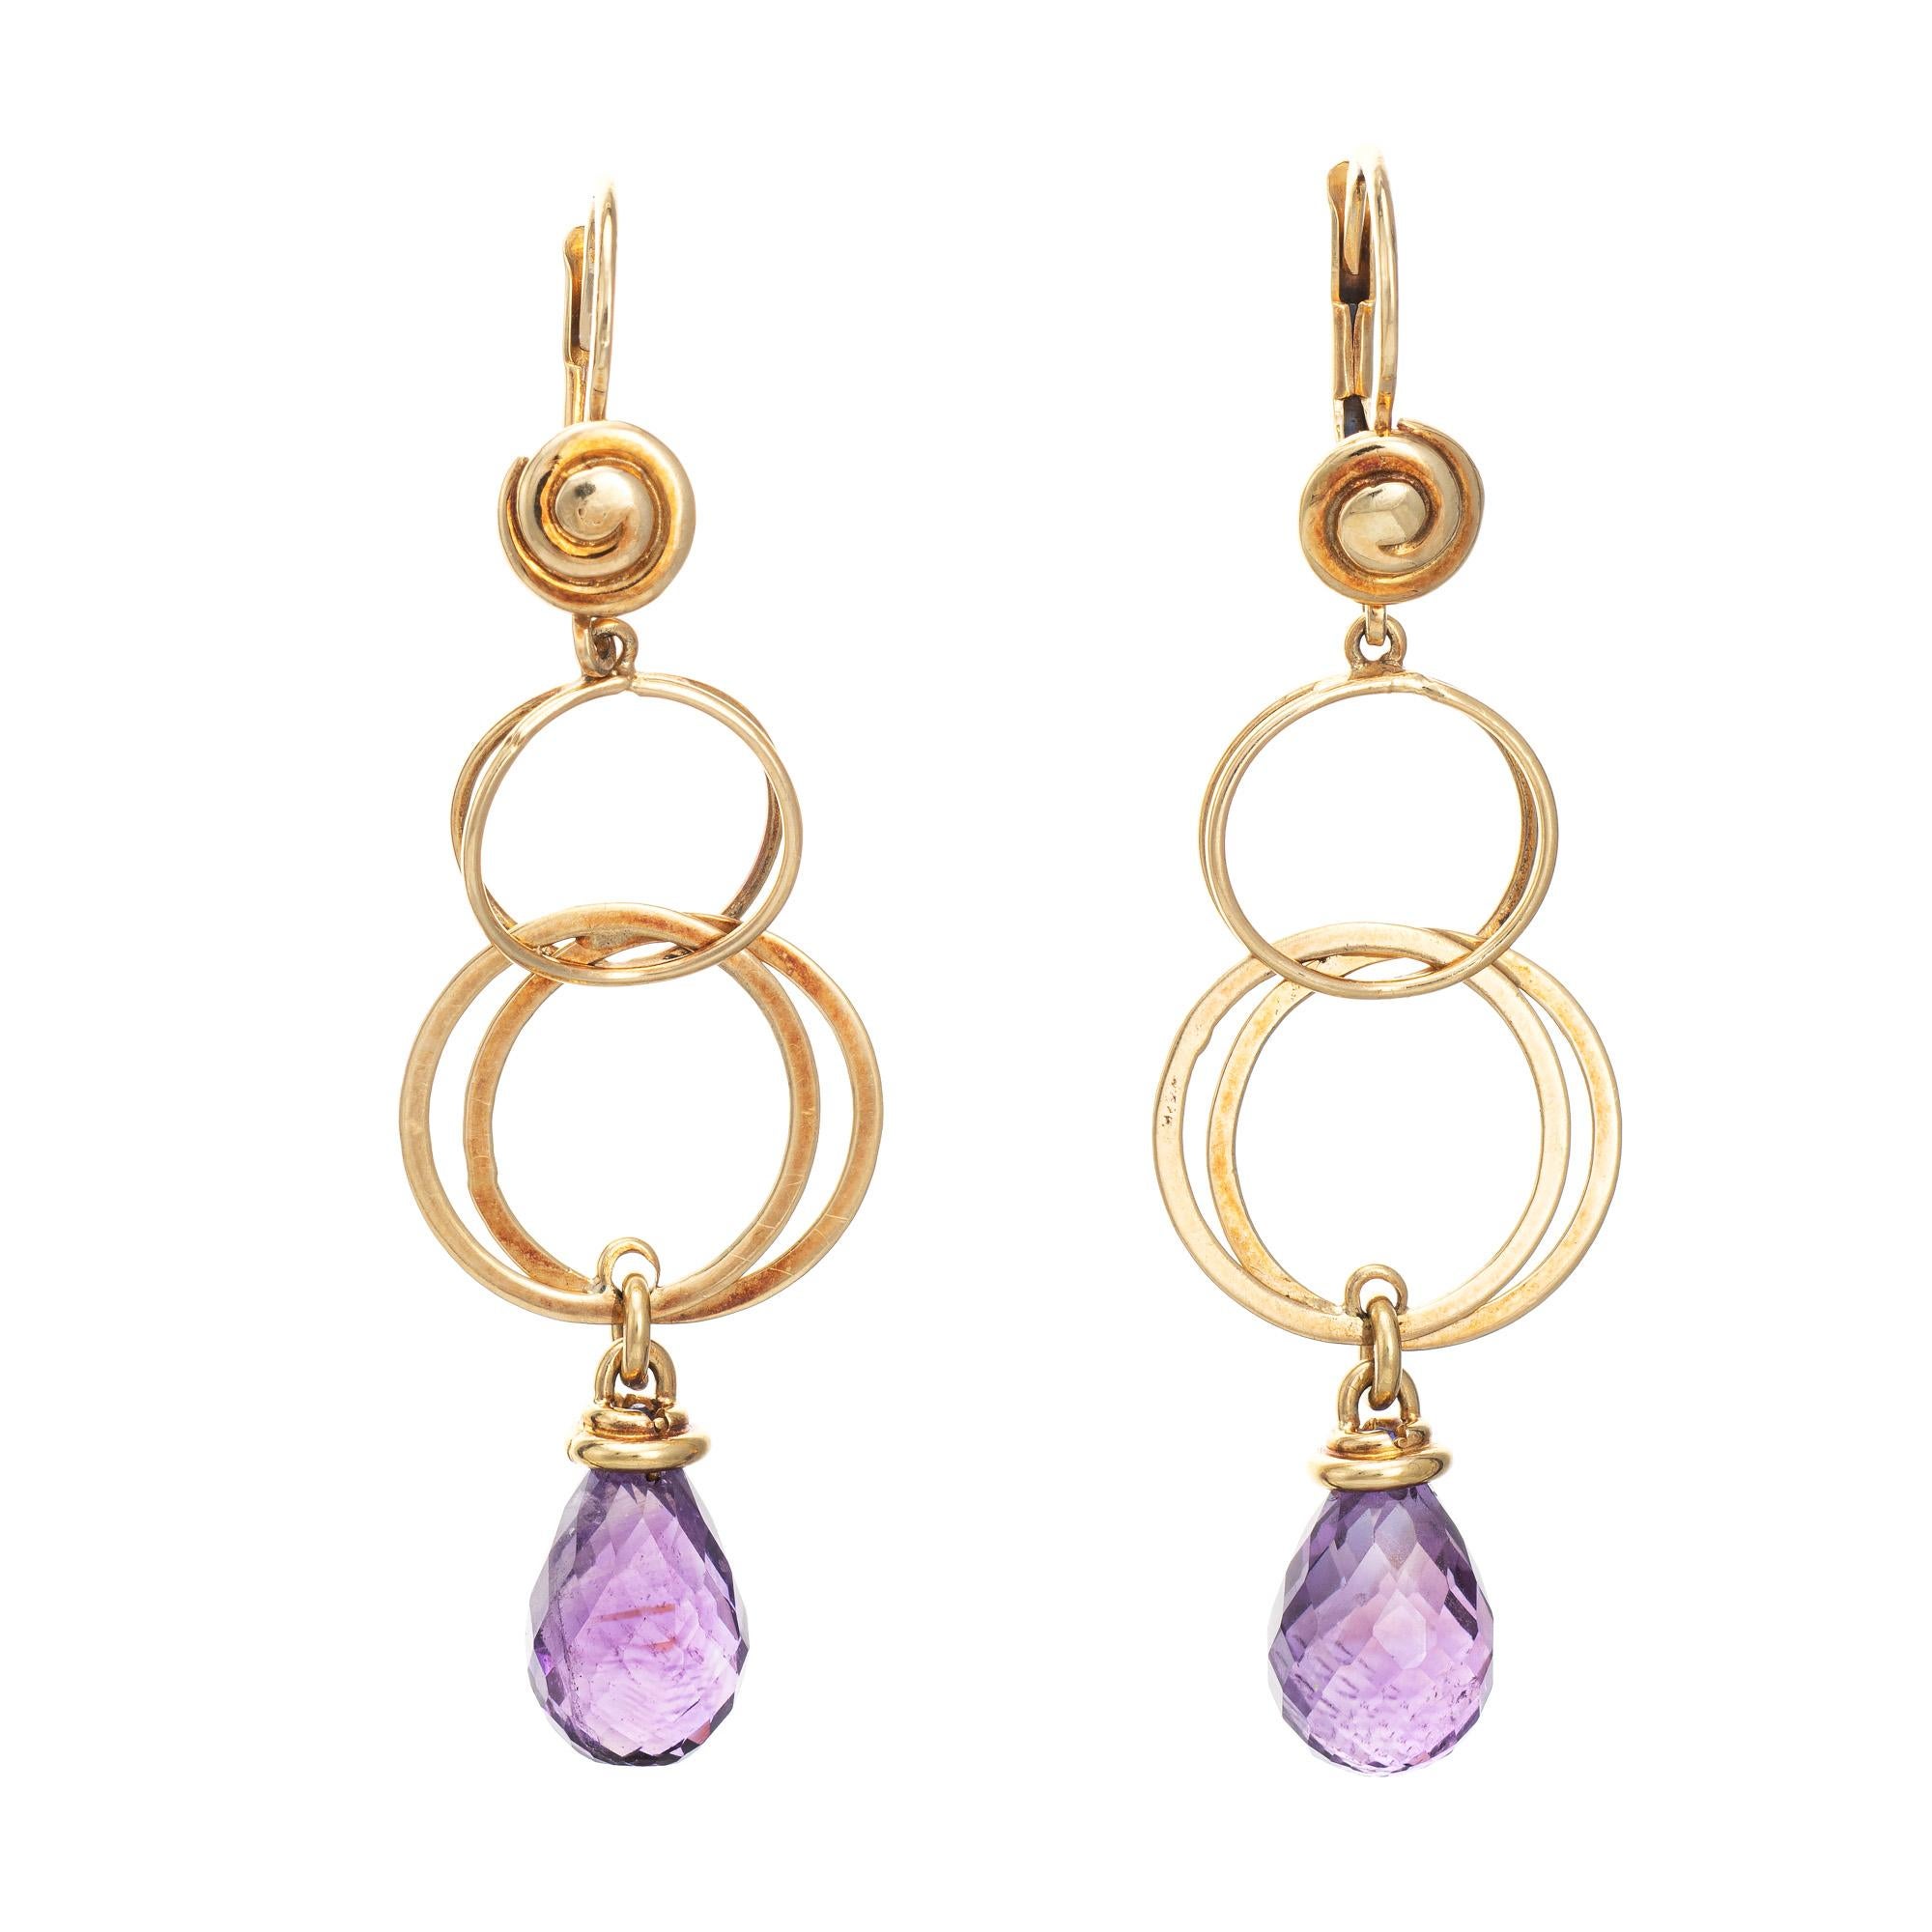 Finely detailed pair of estate briolette amethyst drop earrings crafted in 18k yellow gold. 

Briolette cut amethysts measure 10mm x 8.5mm. The amethysts are in good condition and free of cracks or chips. 
With a stylish circular design the earrings